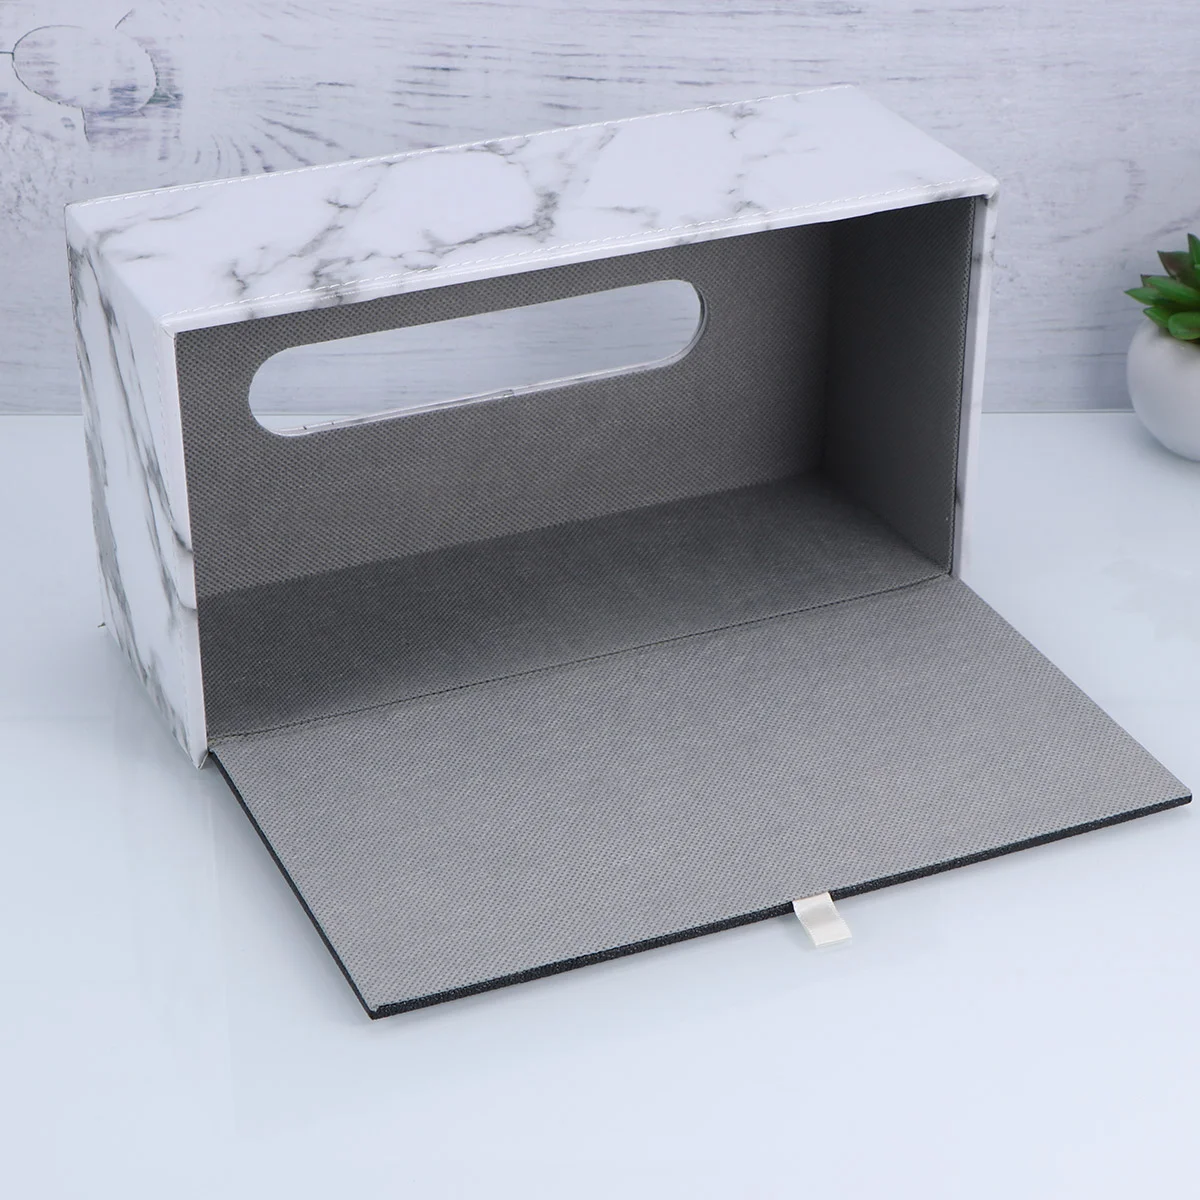 

Marbled Leather Tissue Box Square Paper Towel Holder Desktop Napkin Storage Container for Home Hotel